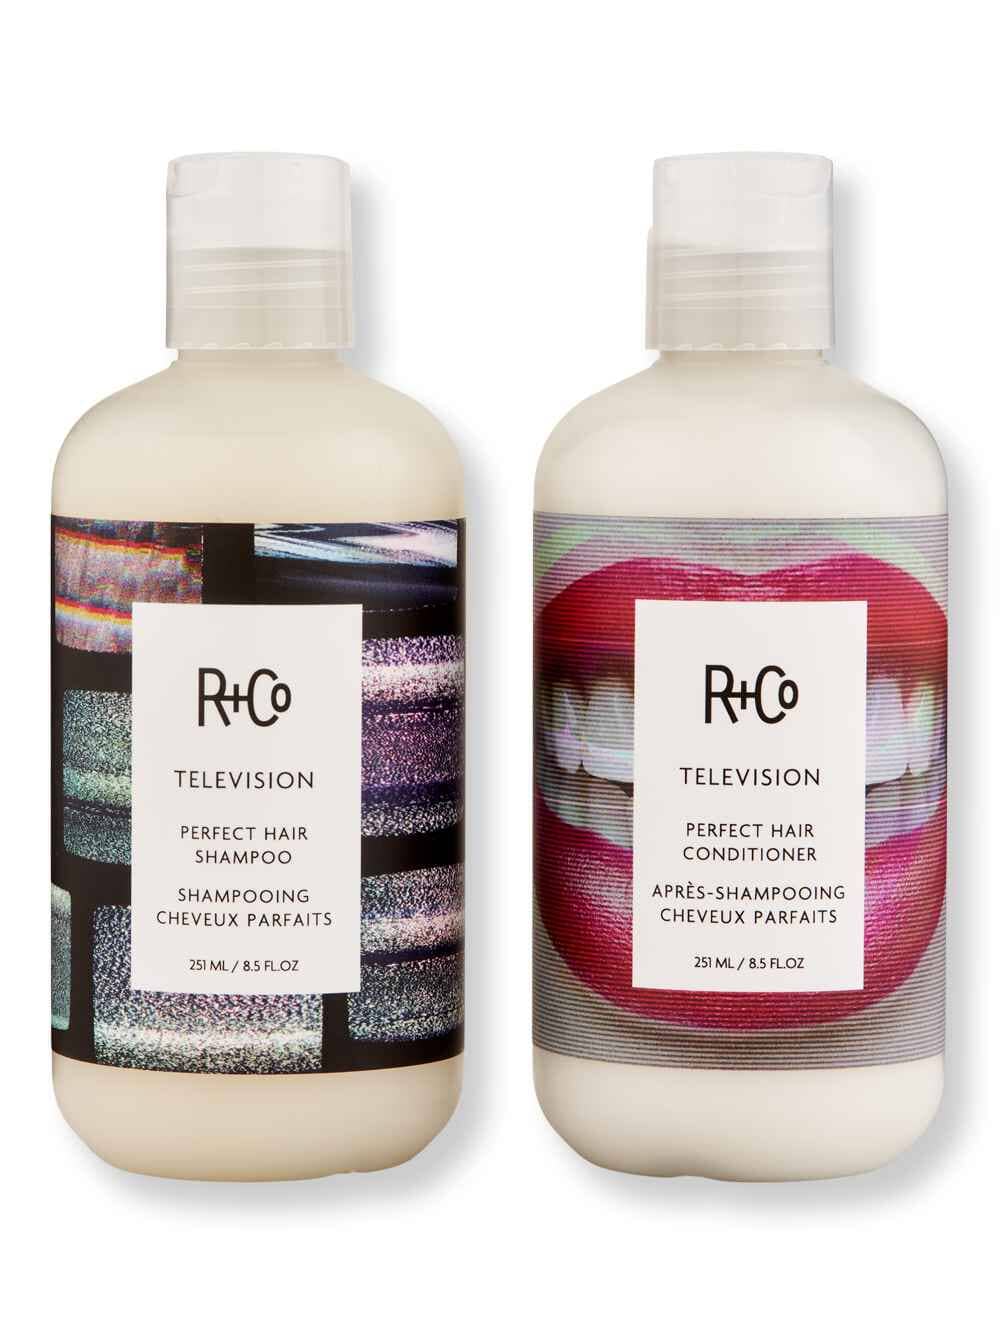 R+Co R+Co Television Perfect Hair Shampoo & Conditioner 8.5 oz Hair Care Value Sets 